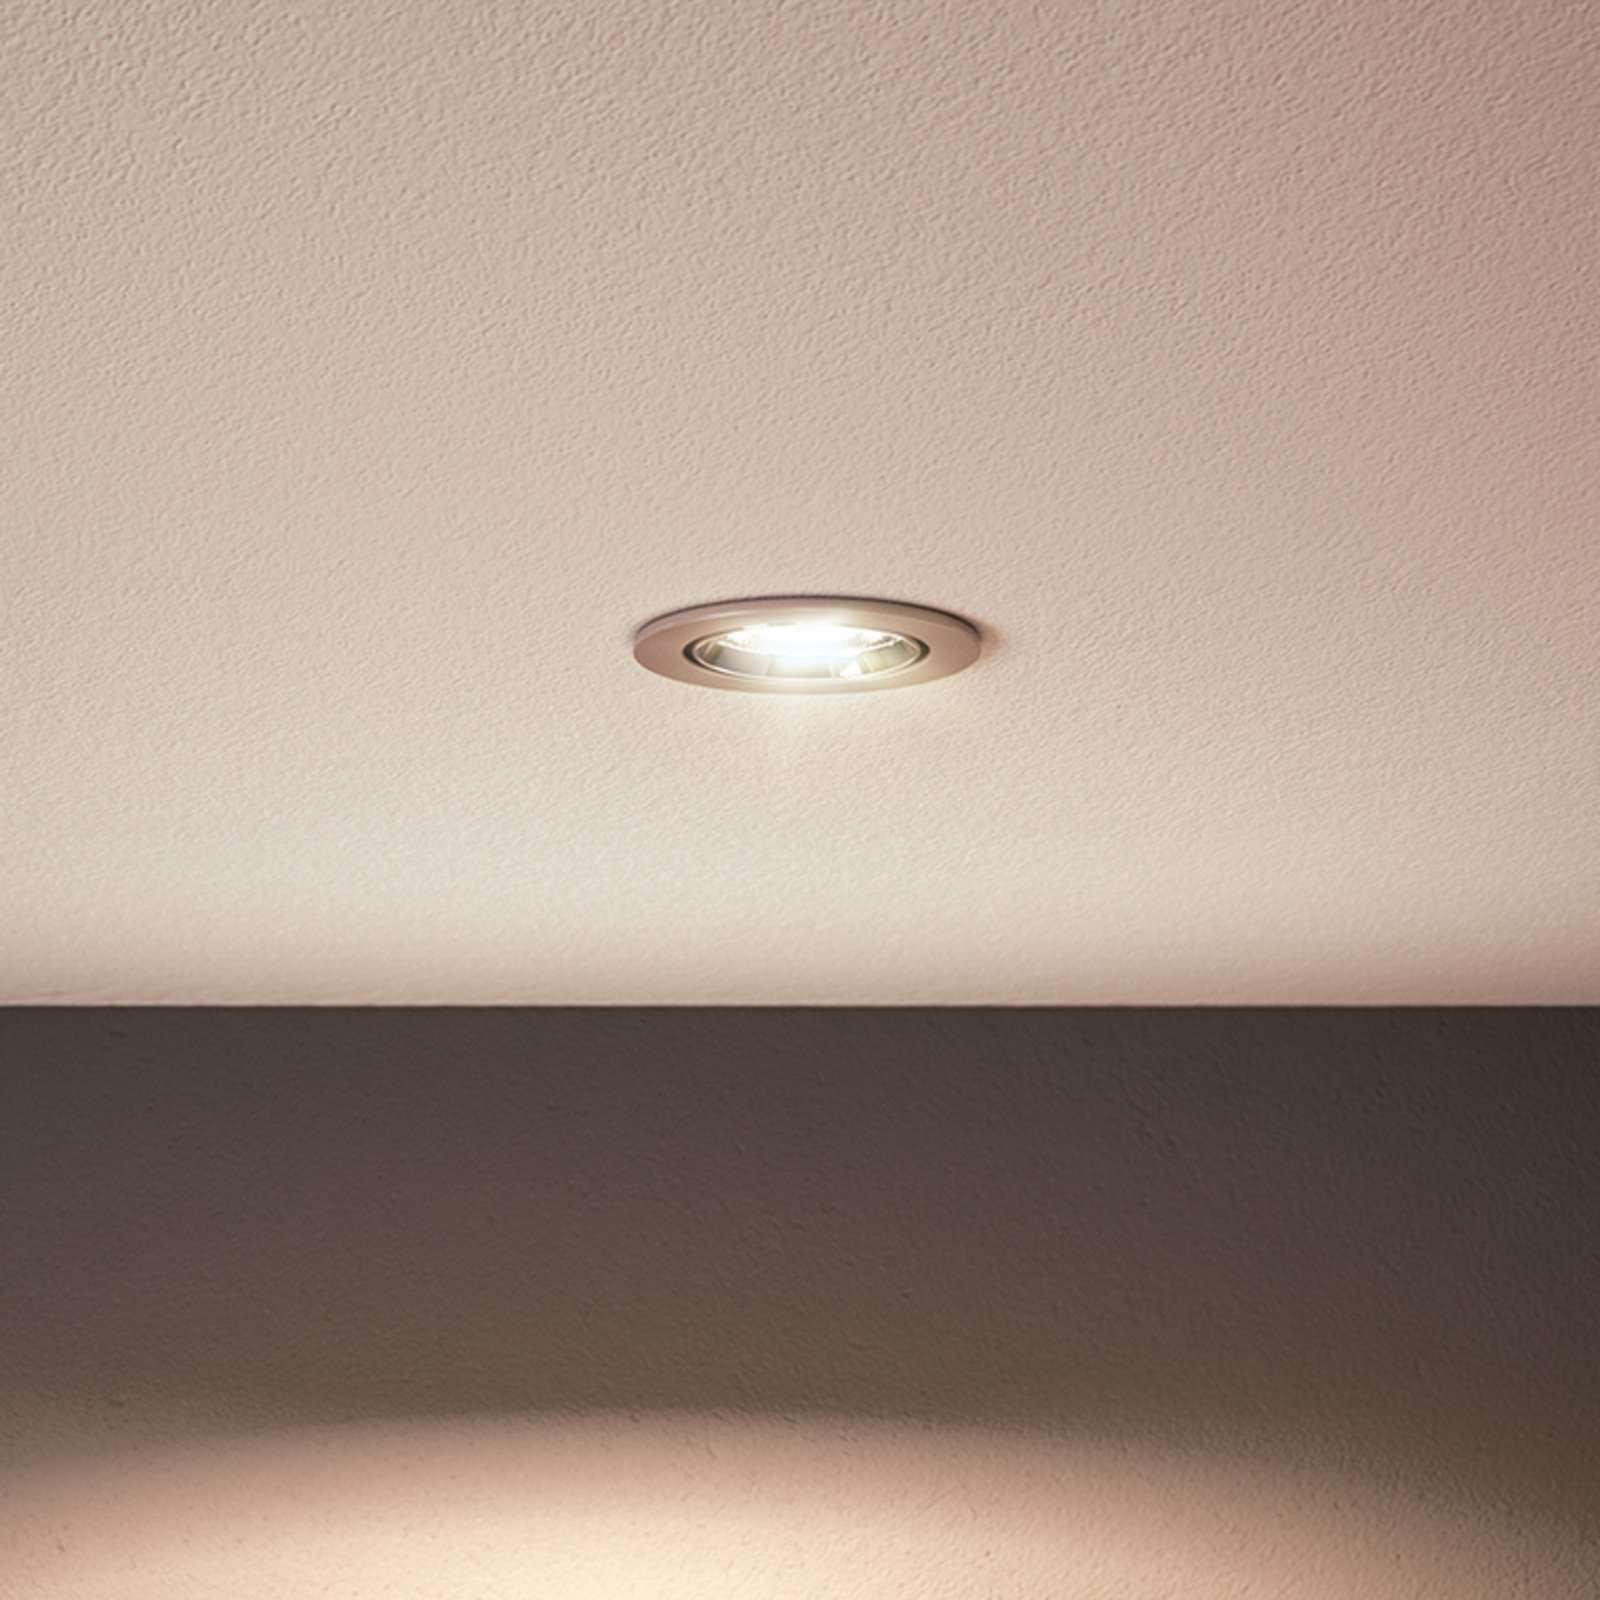 Philips LED GU10 3,5 W 275 lm 840 claire 36° x6